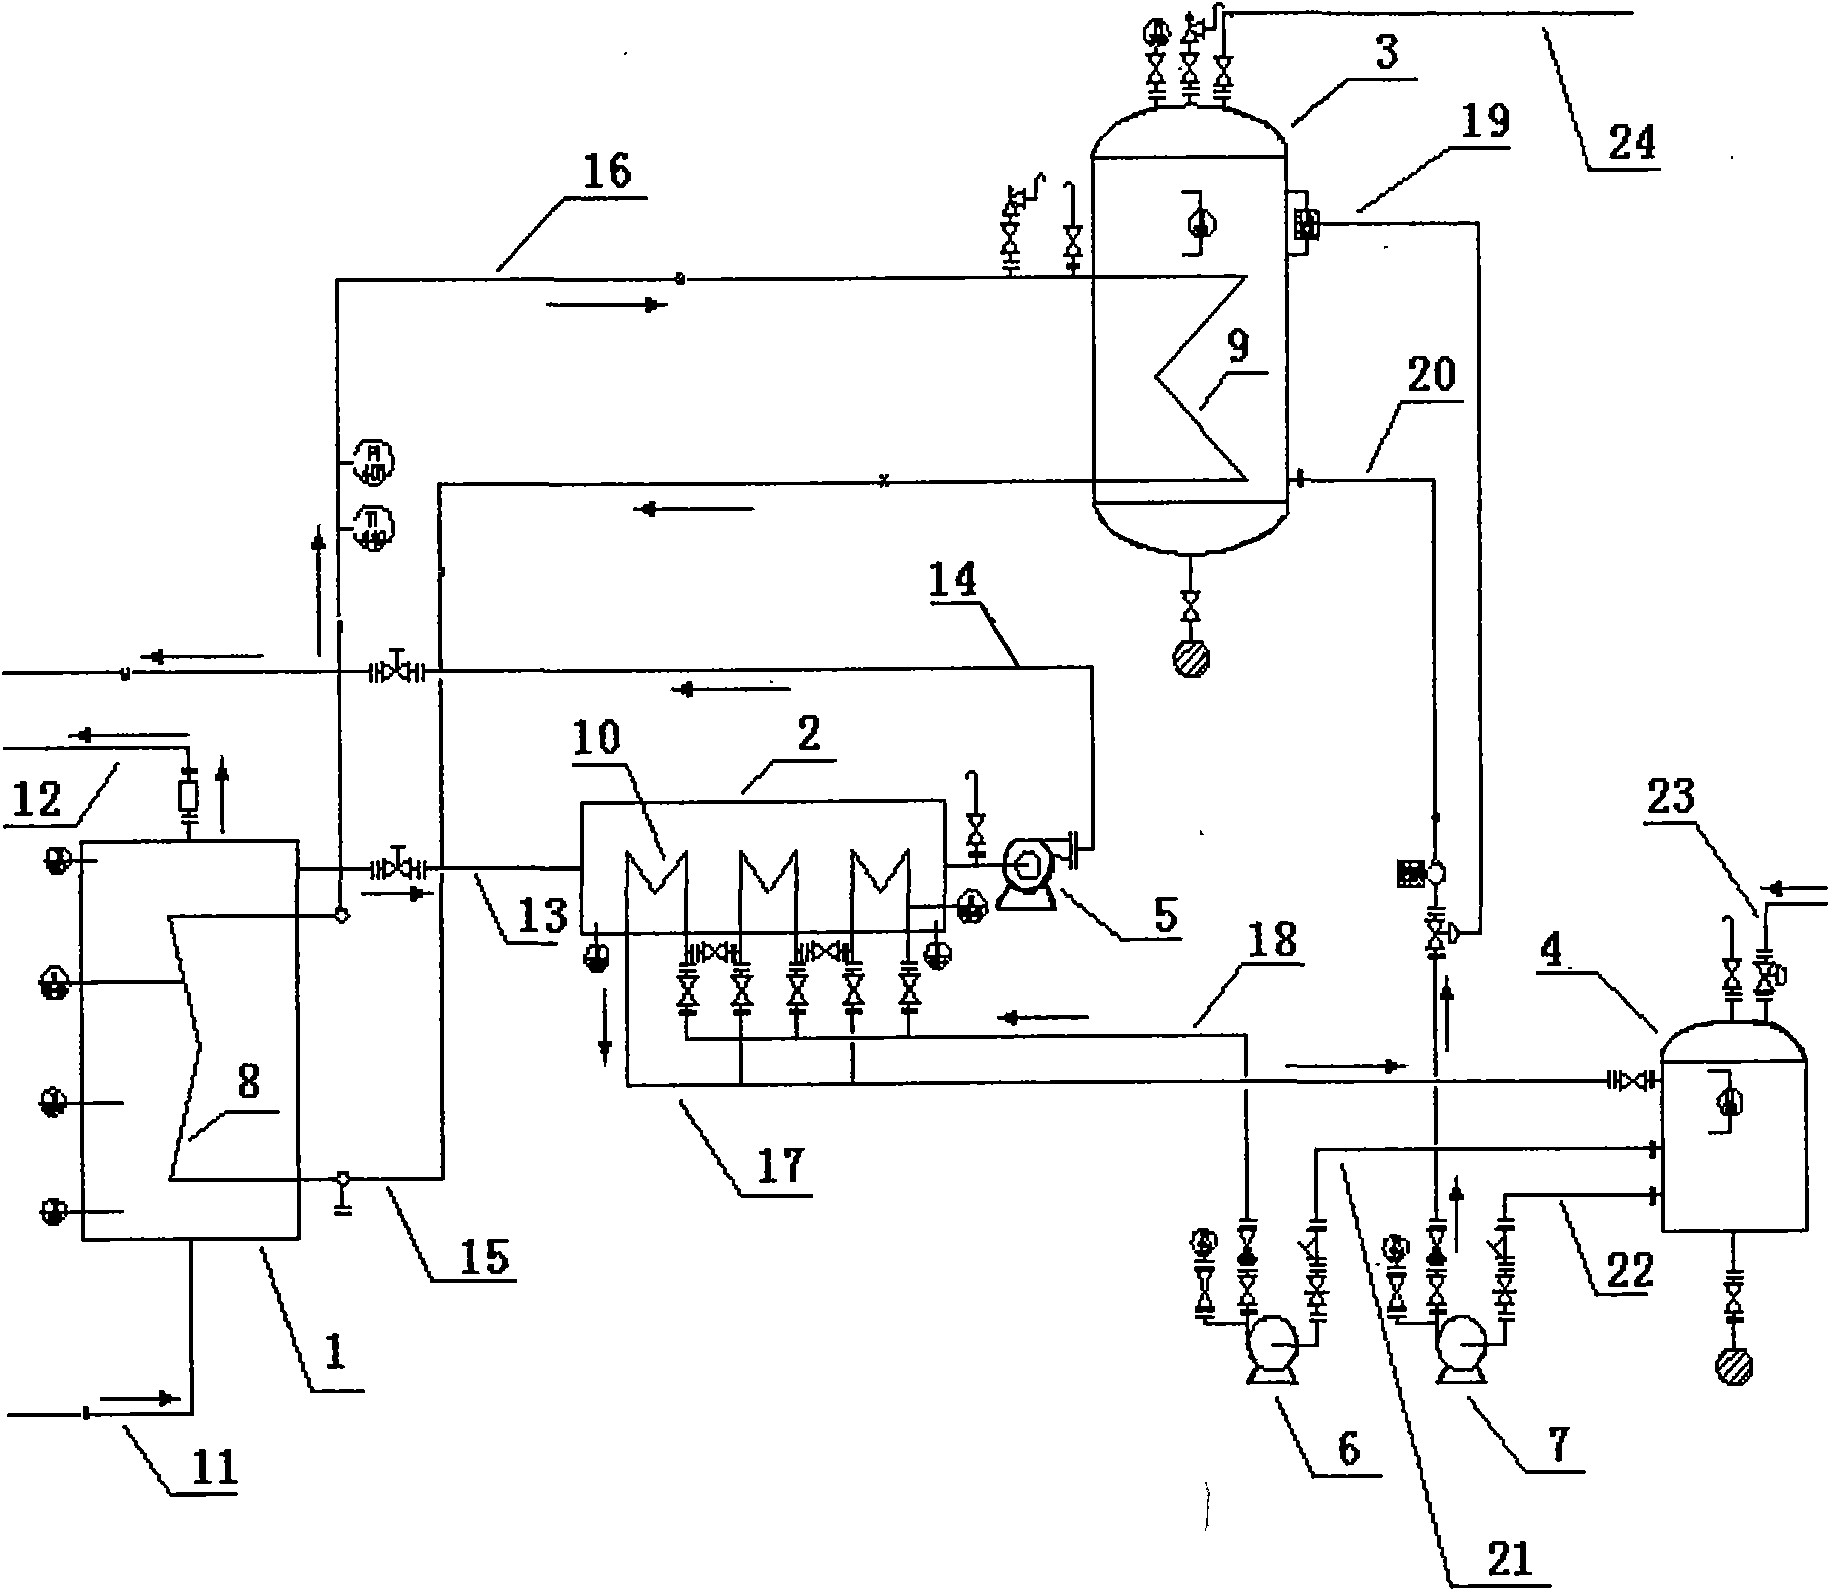 System and method for recovering waste heat of coke-oven crude gas